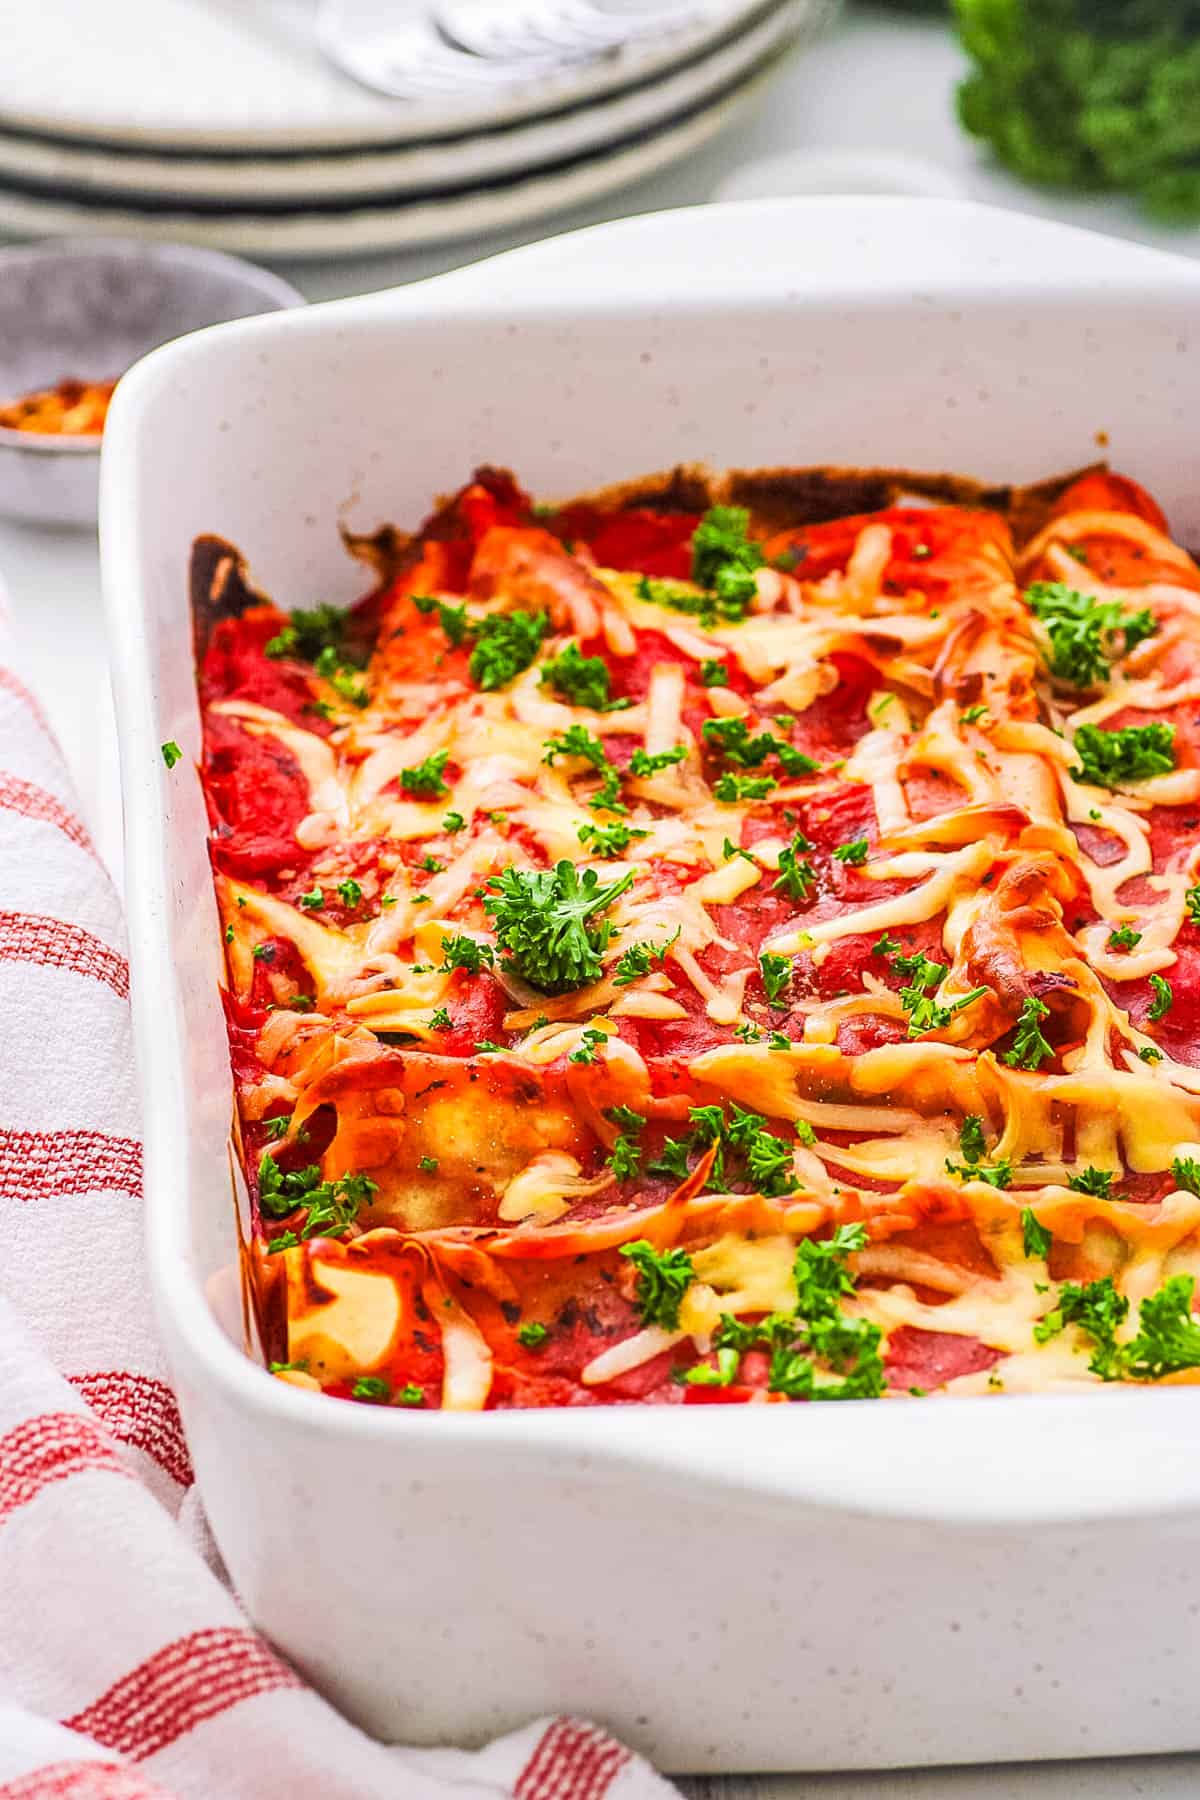 Vegetarian pasta rolls in a casserole dish, topped with fresh herbs.